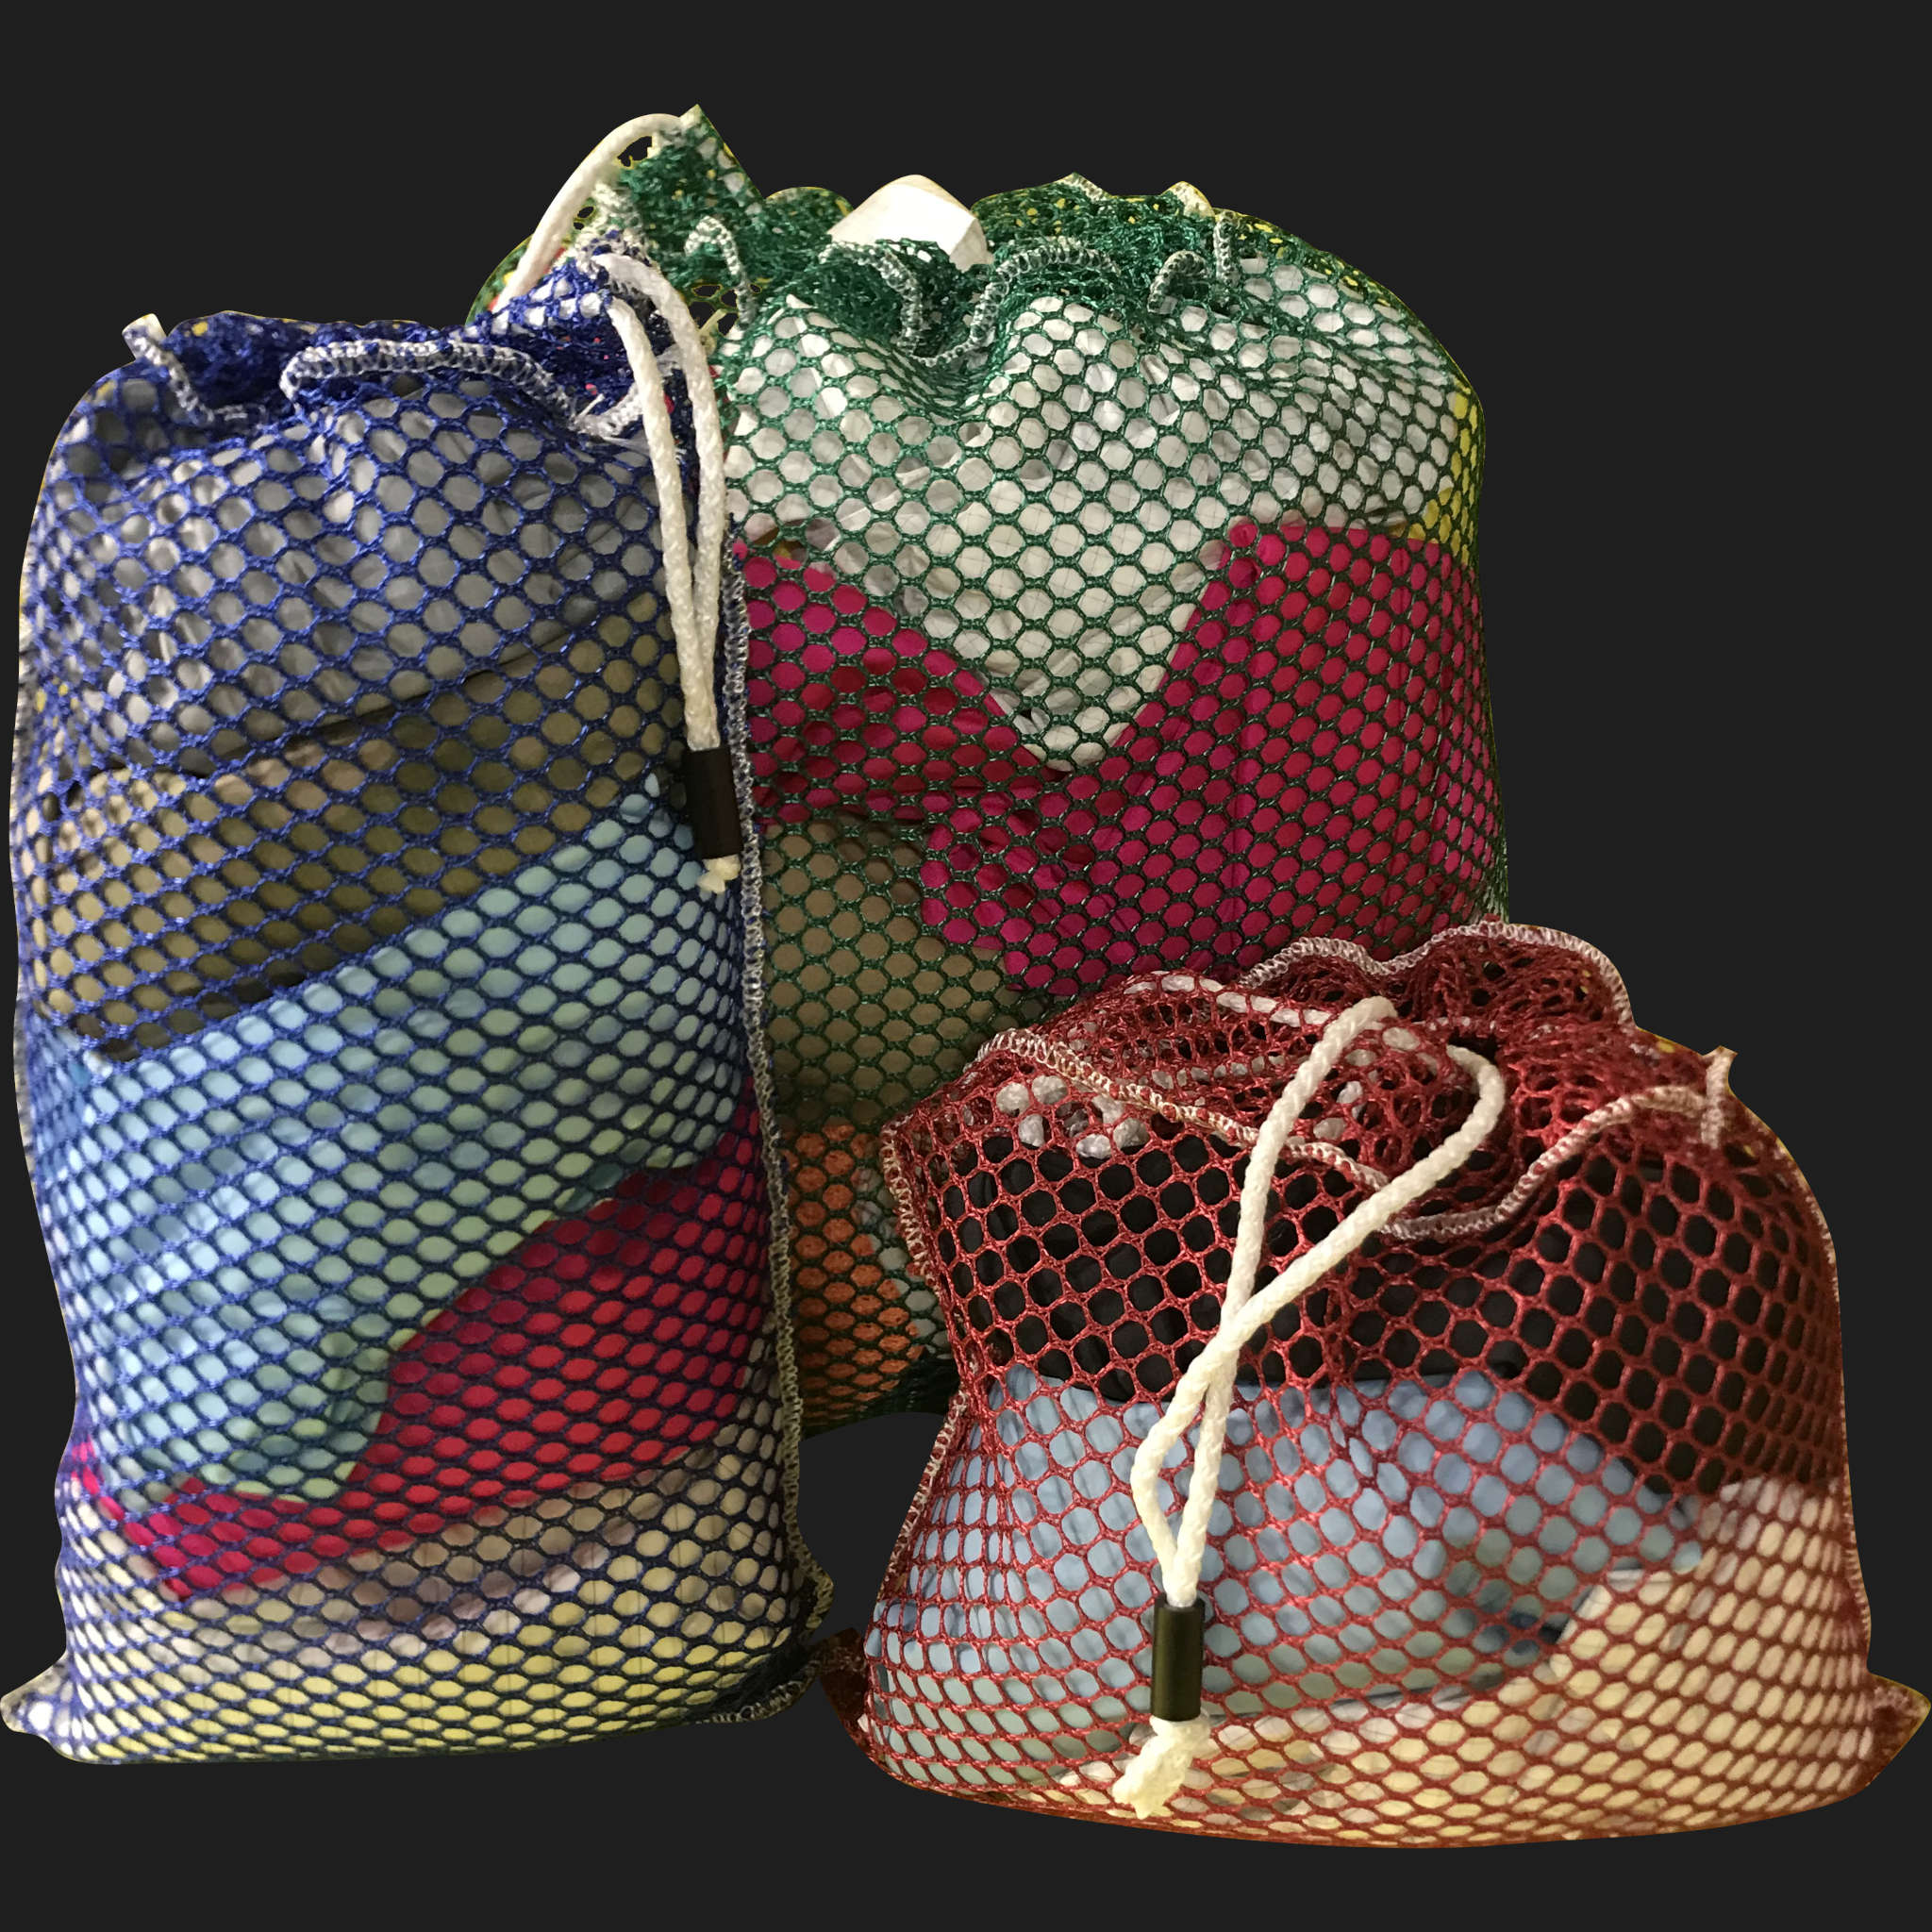 50" x 60" Customized Mesh-Net-Laundry Bags Heavy Duty with Cord and barrellock closure